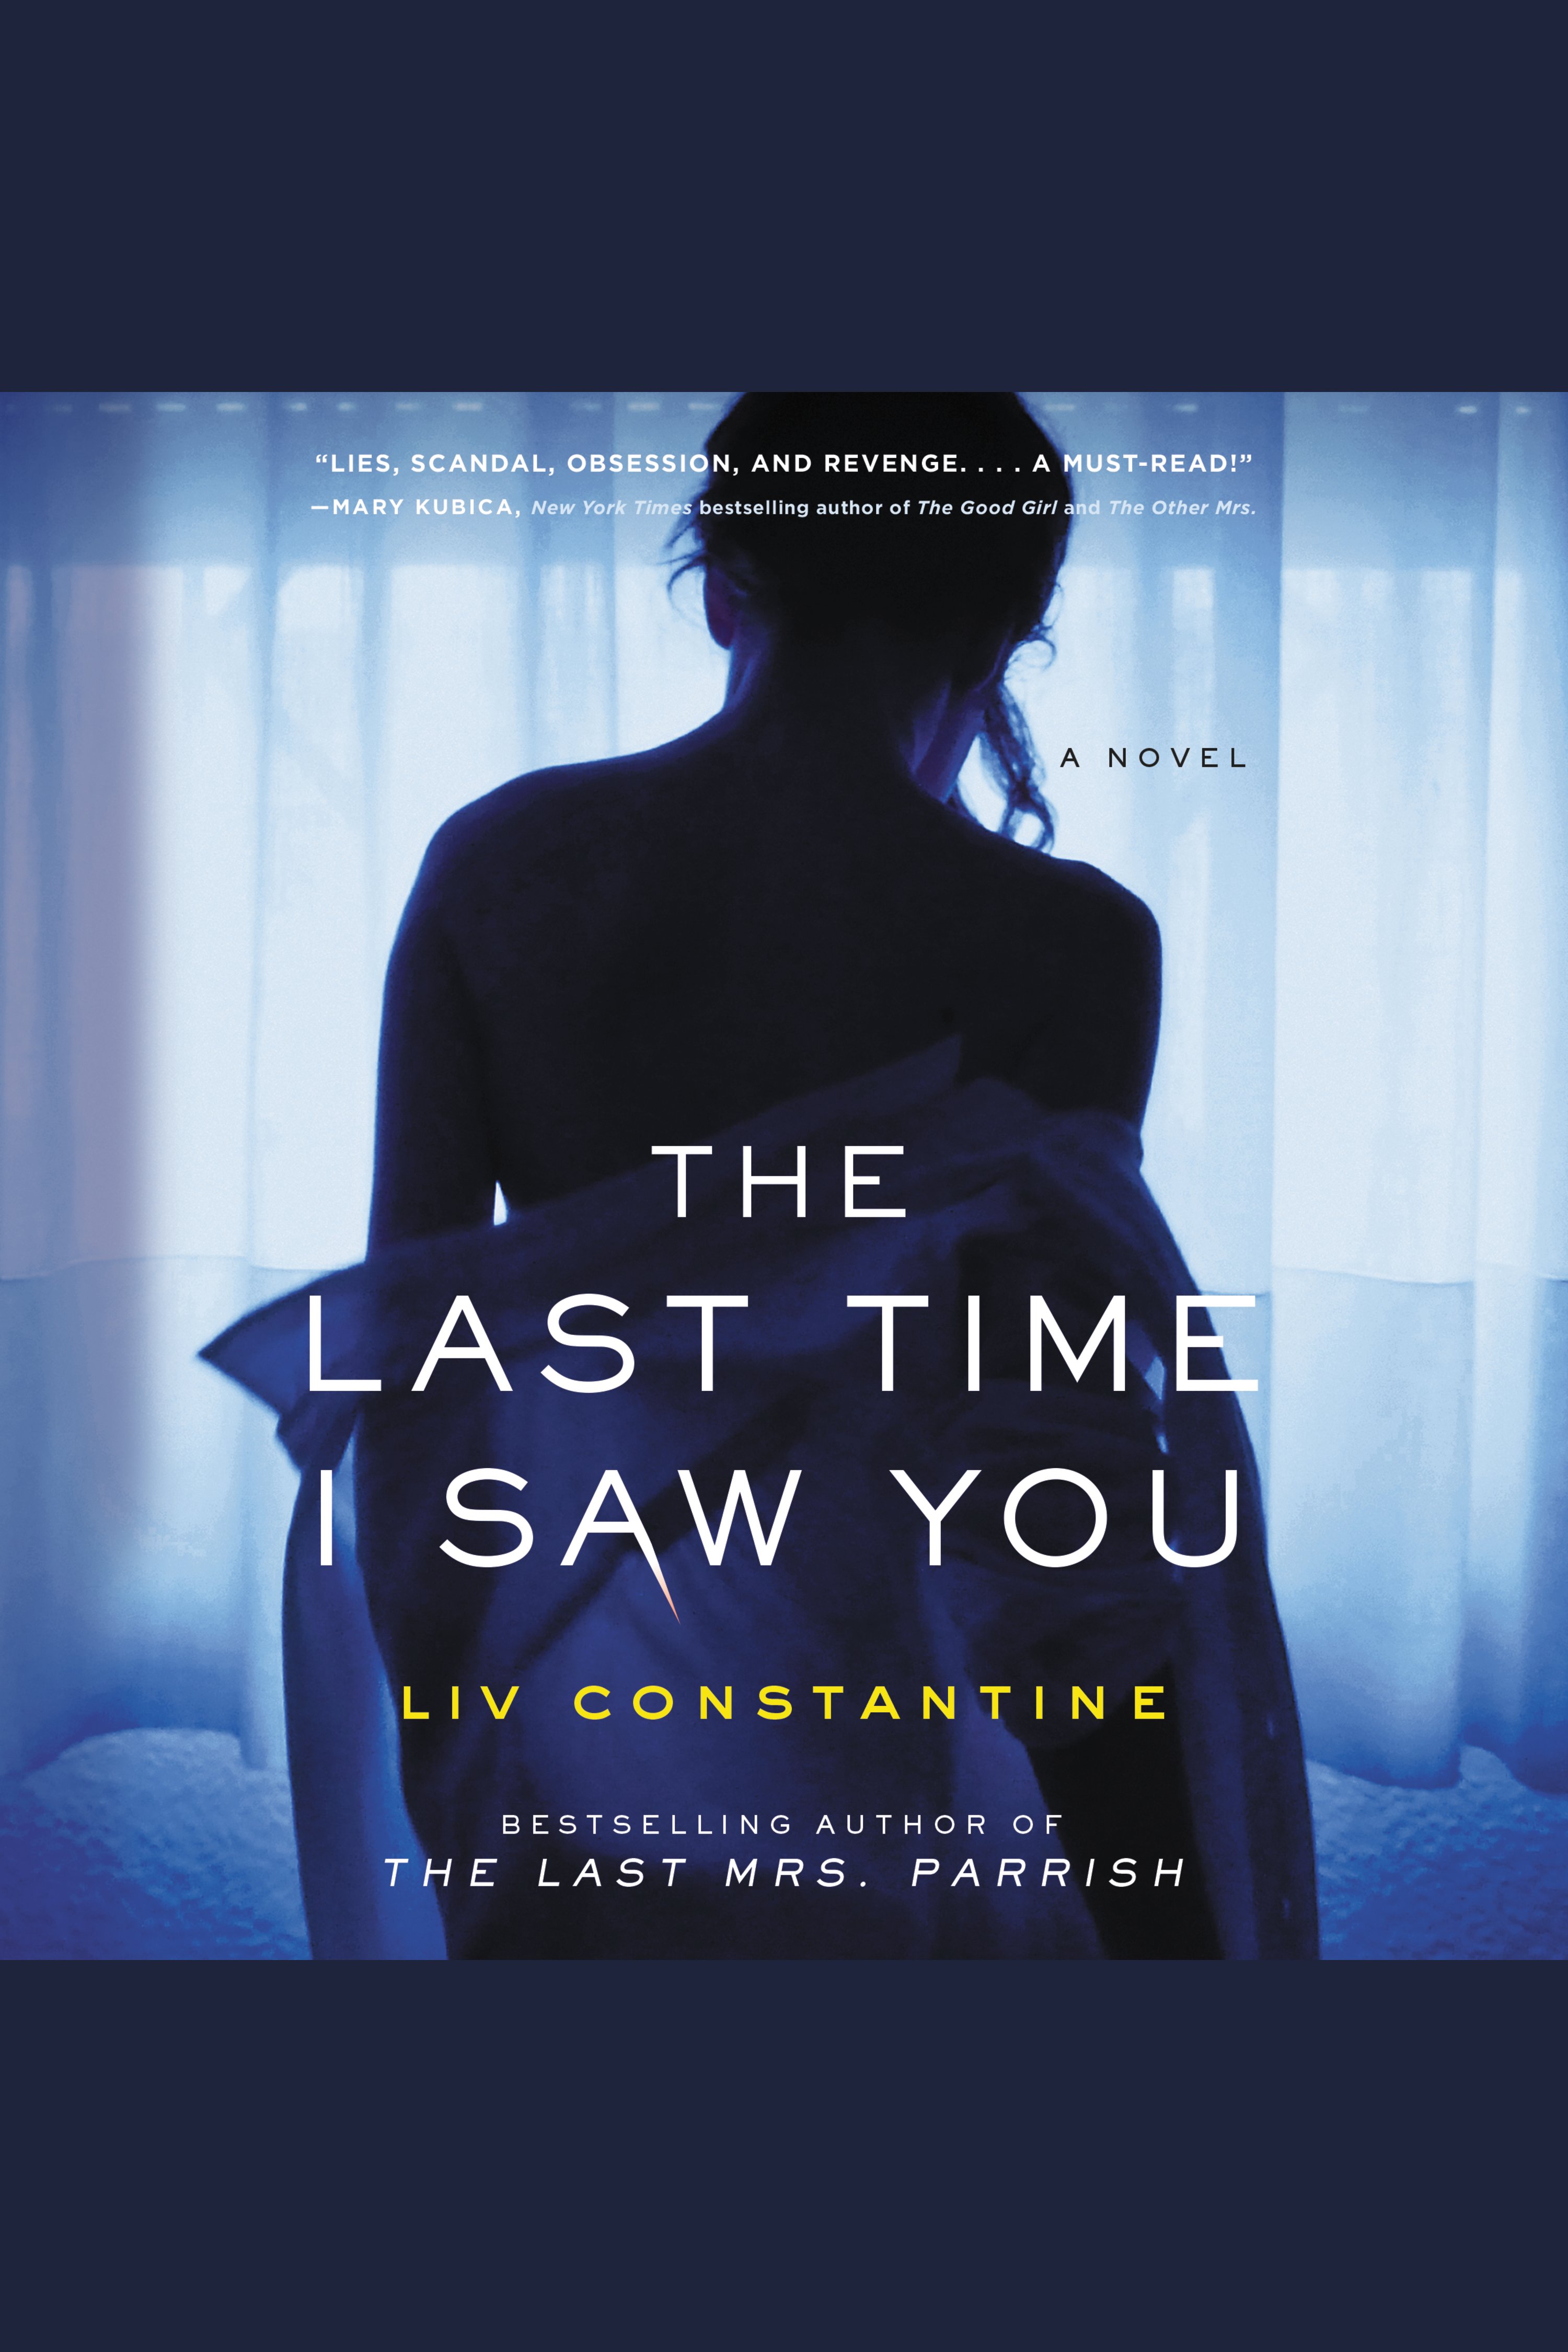 The last time I saw you cover image